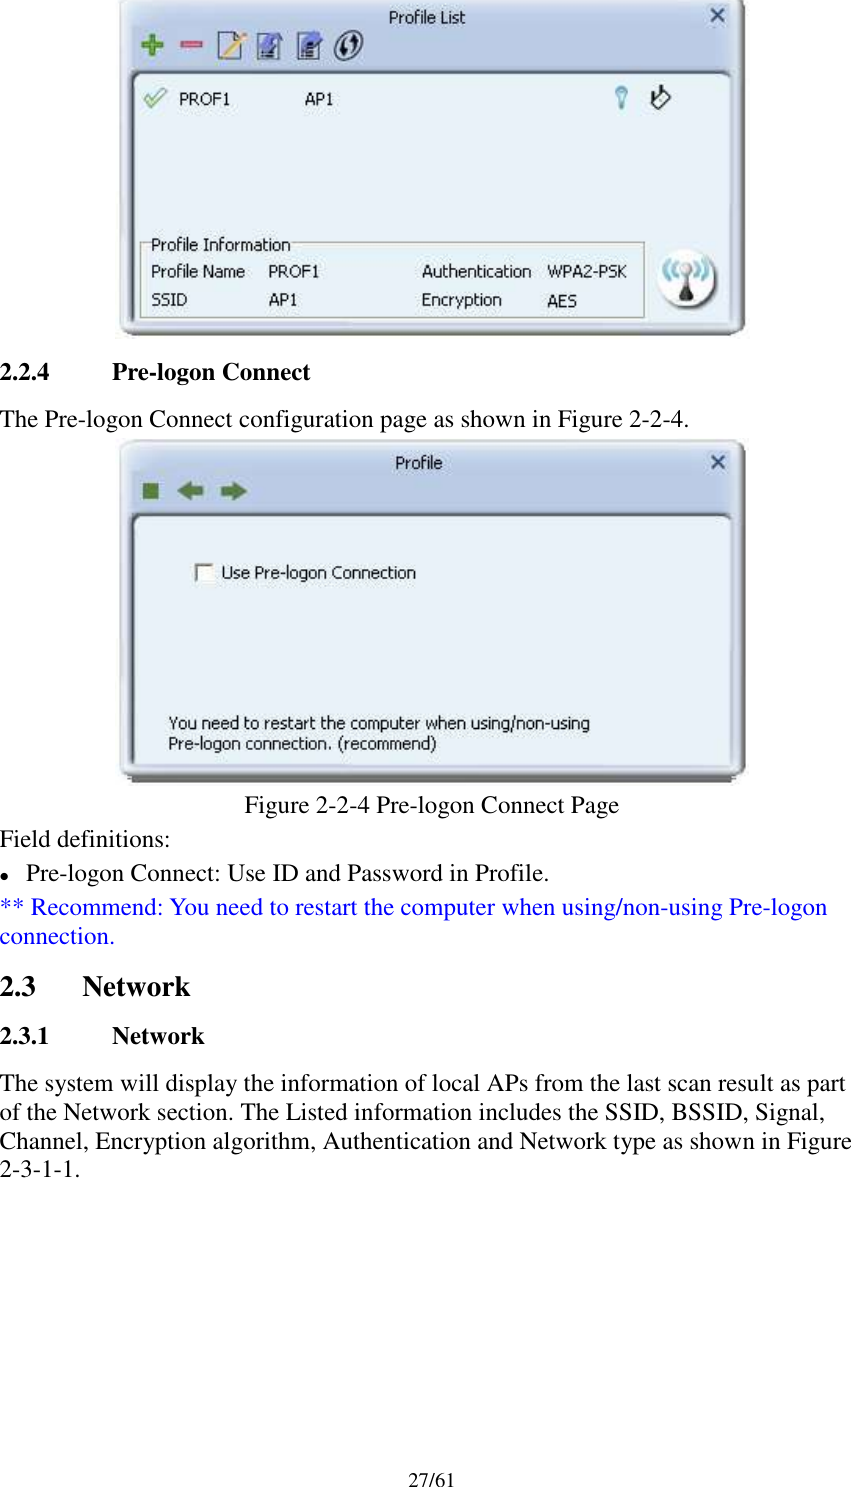 27/612.2.4 Pre-logon ConnectThe Pre-logon Connect configuration page as shown in Figure 2-2-4.Figure 2-2-4 Pre-logon Connect PageField definitions:Pre-logon Connect: Use ID and Password in Profile.** Recommend: You need to restart the computer when using/non-using Pre-logonconnection.2.3 Network2.3.1 NetworkThe system will display the information of local APs from the last scan result as partof the Network section. The Listed information includes the SSID, BSSID, Signal,Channel, Encryption algorithm, Authentication and Network type as shown in Figure2-3-1-1.